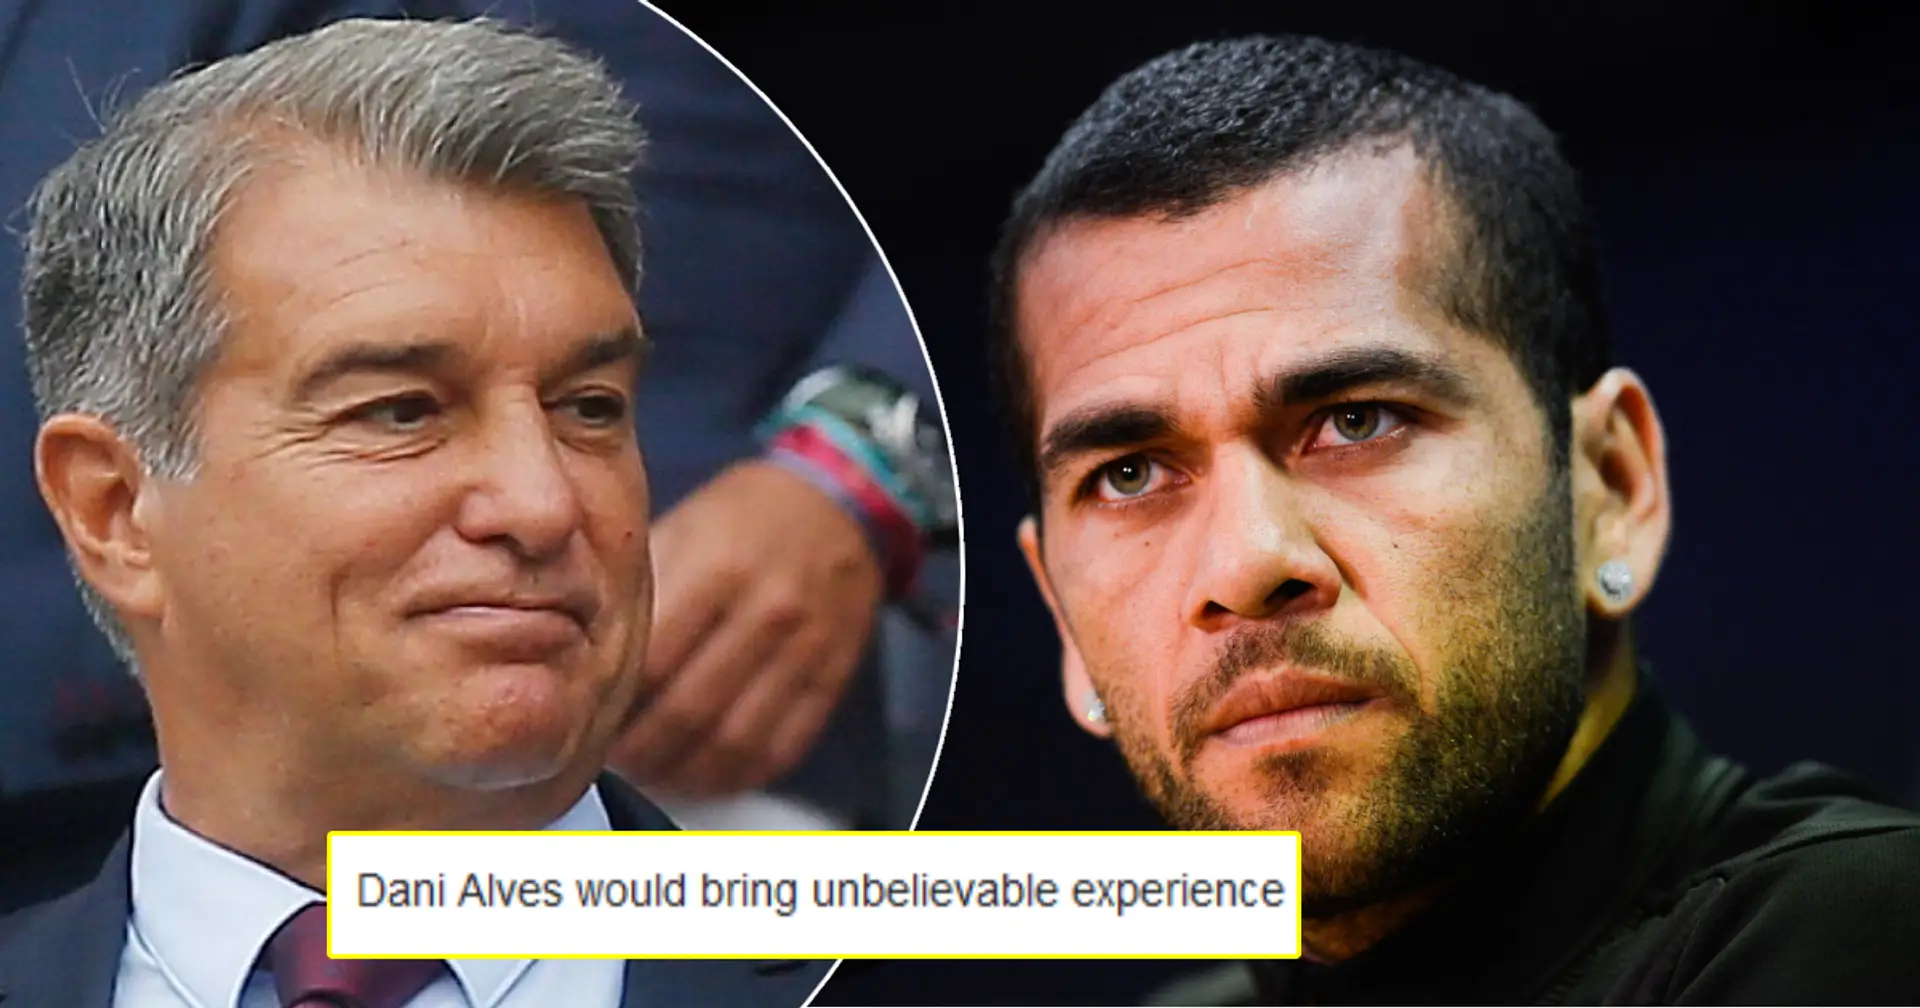 'I hope Barcelona doesn’t sign him': Fans react as Dani Alves becomes a free agent